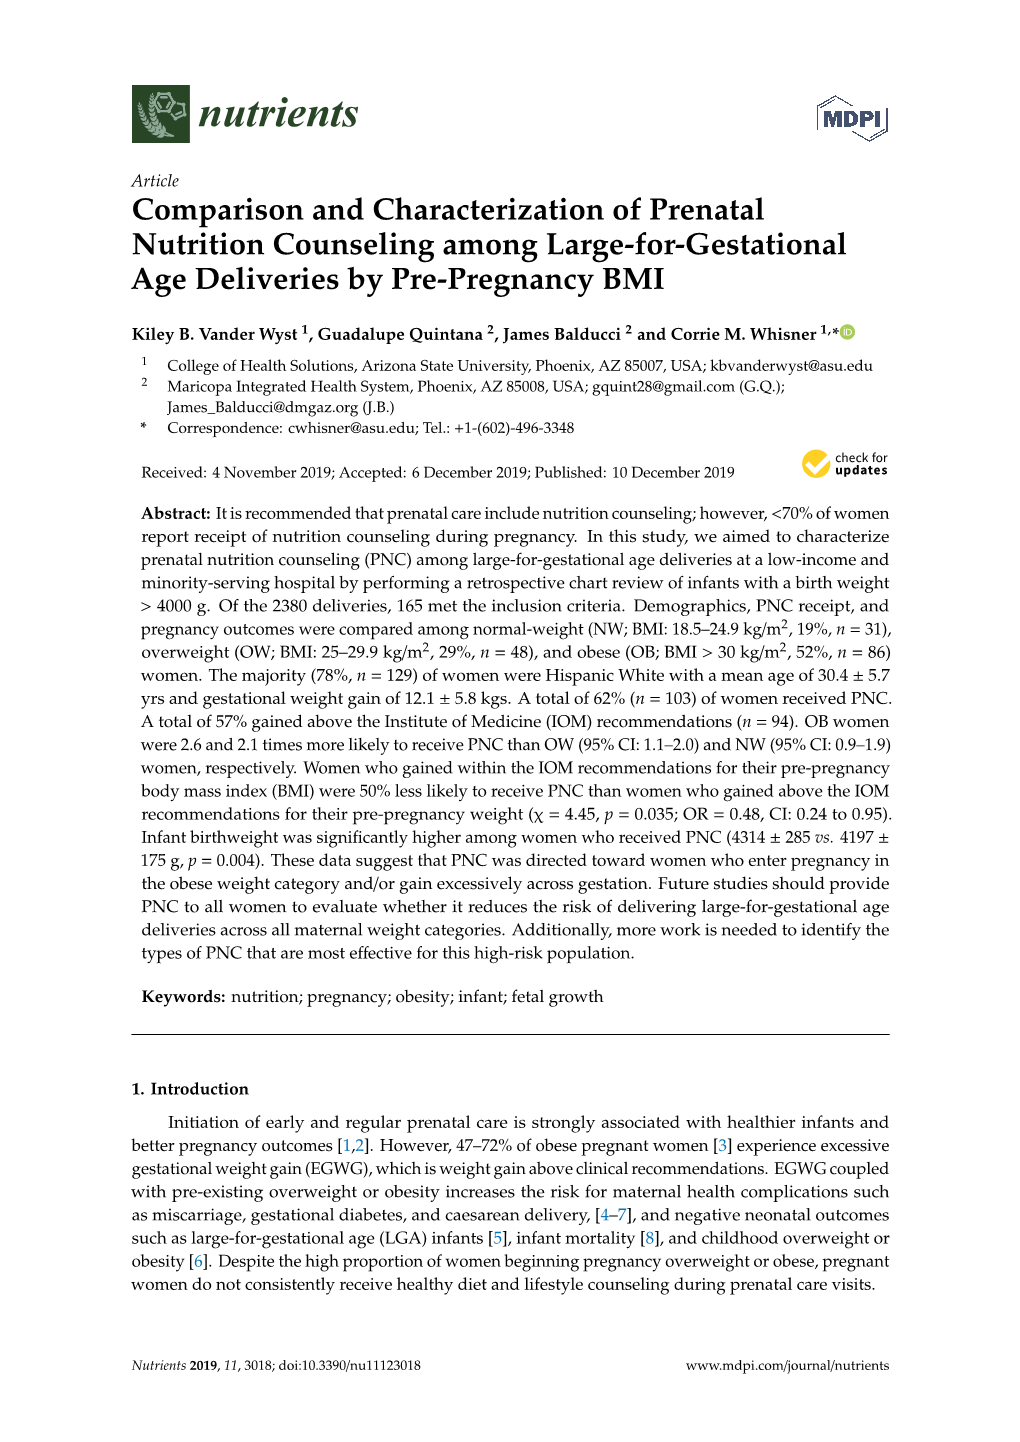 Comparison and Characterization of Prenatal Nutrition Counseling Among Large-For-Gestational Age Deliveries by Pre-Pregnancy BMI